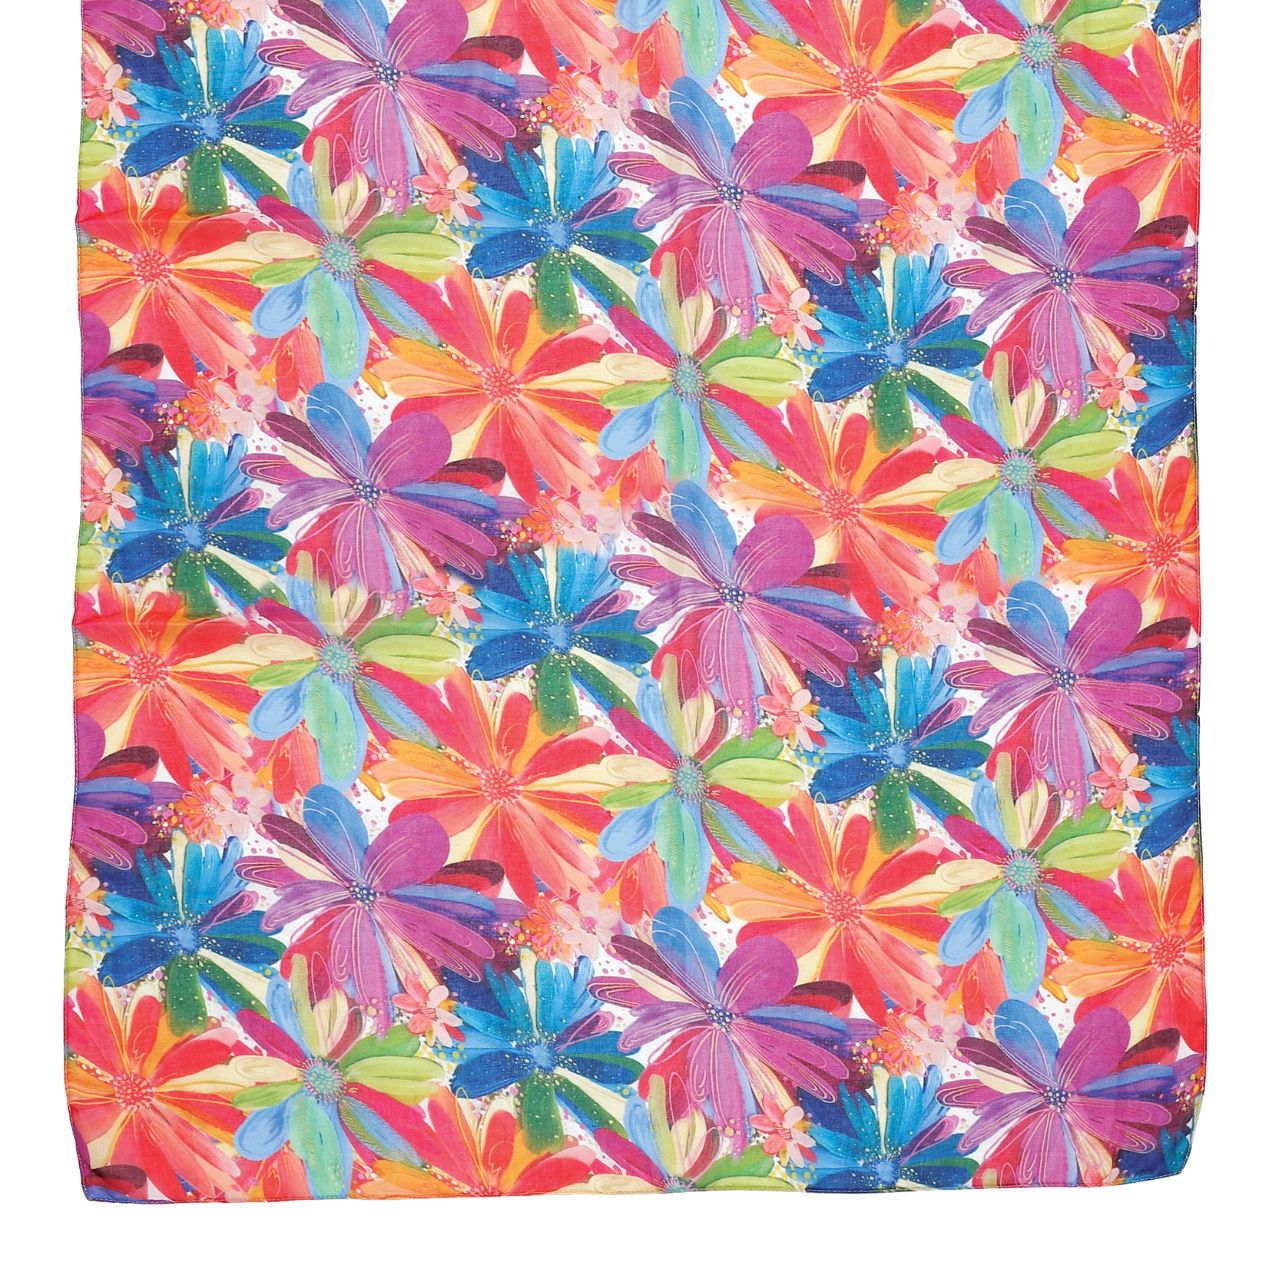 Jessi Raulet Jessi's Garden Scarf by Etta Vee  Artist, designer and art influencer, Jessi Raulet, is known for her colourful and bold designs. This soft and slightly sheer scarf drapes beautifully around your neck or tied as a sarong. A scarf for all seasons. Tie onto a handbag for a vibrant pop of colour.